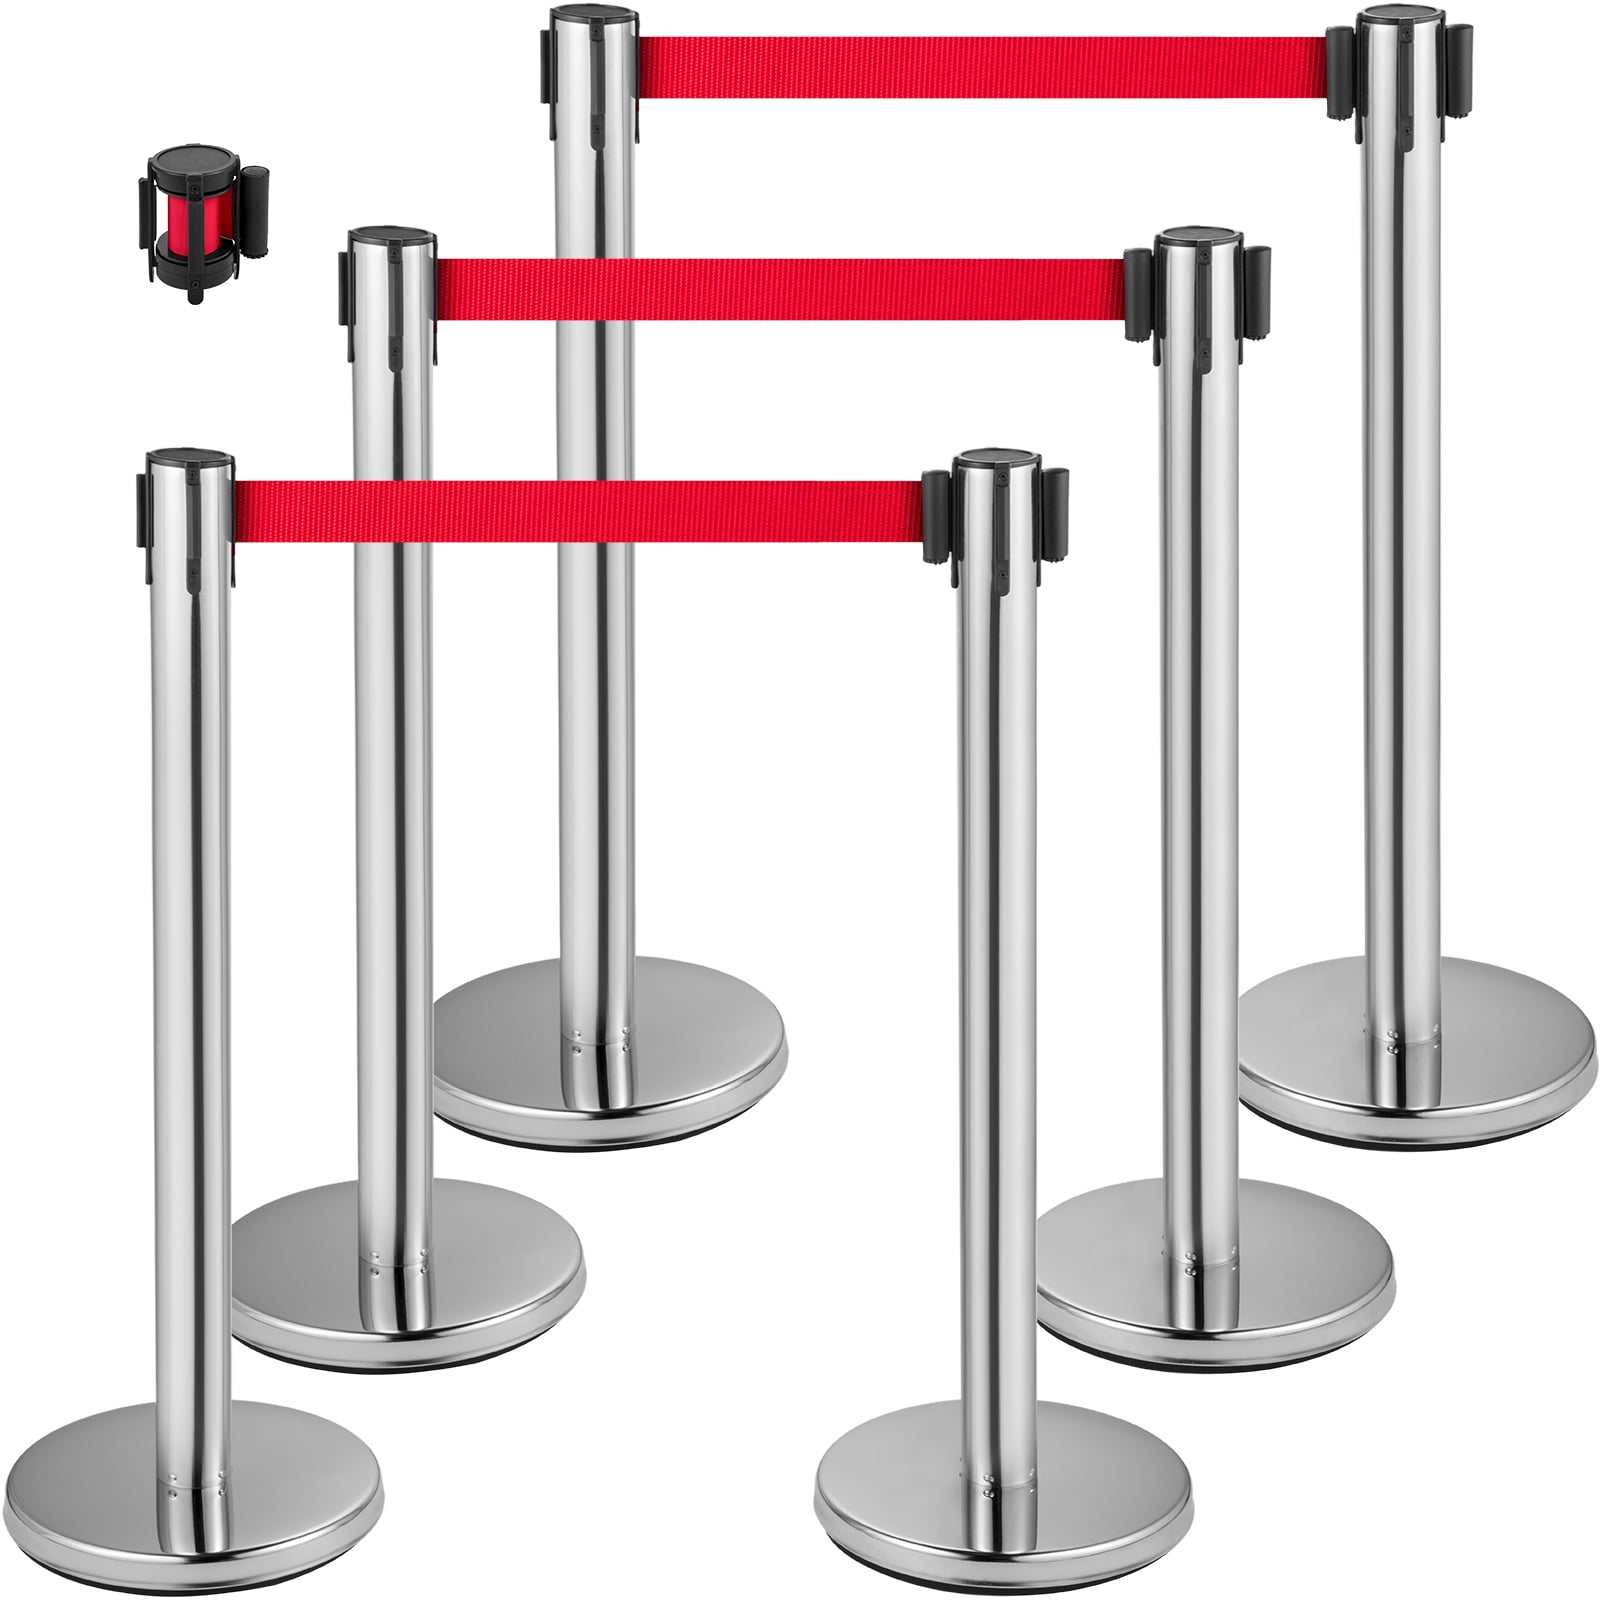 4 PCS C-HOOK PLASTIC STANCHION IN YELLOW VIP CROWD CONTROL 